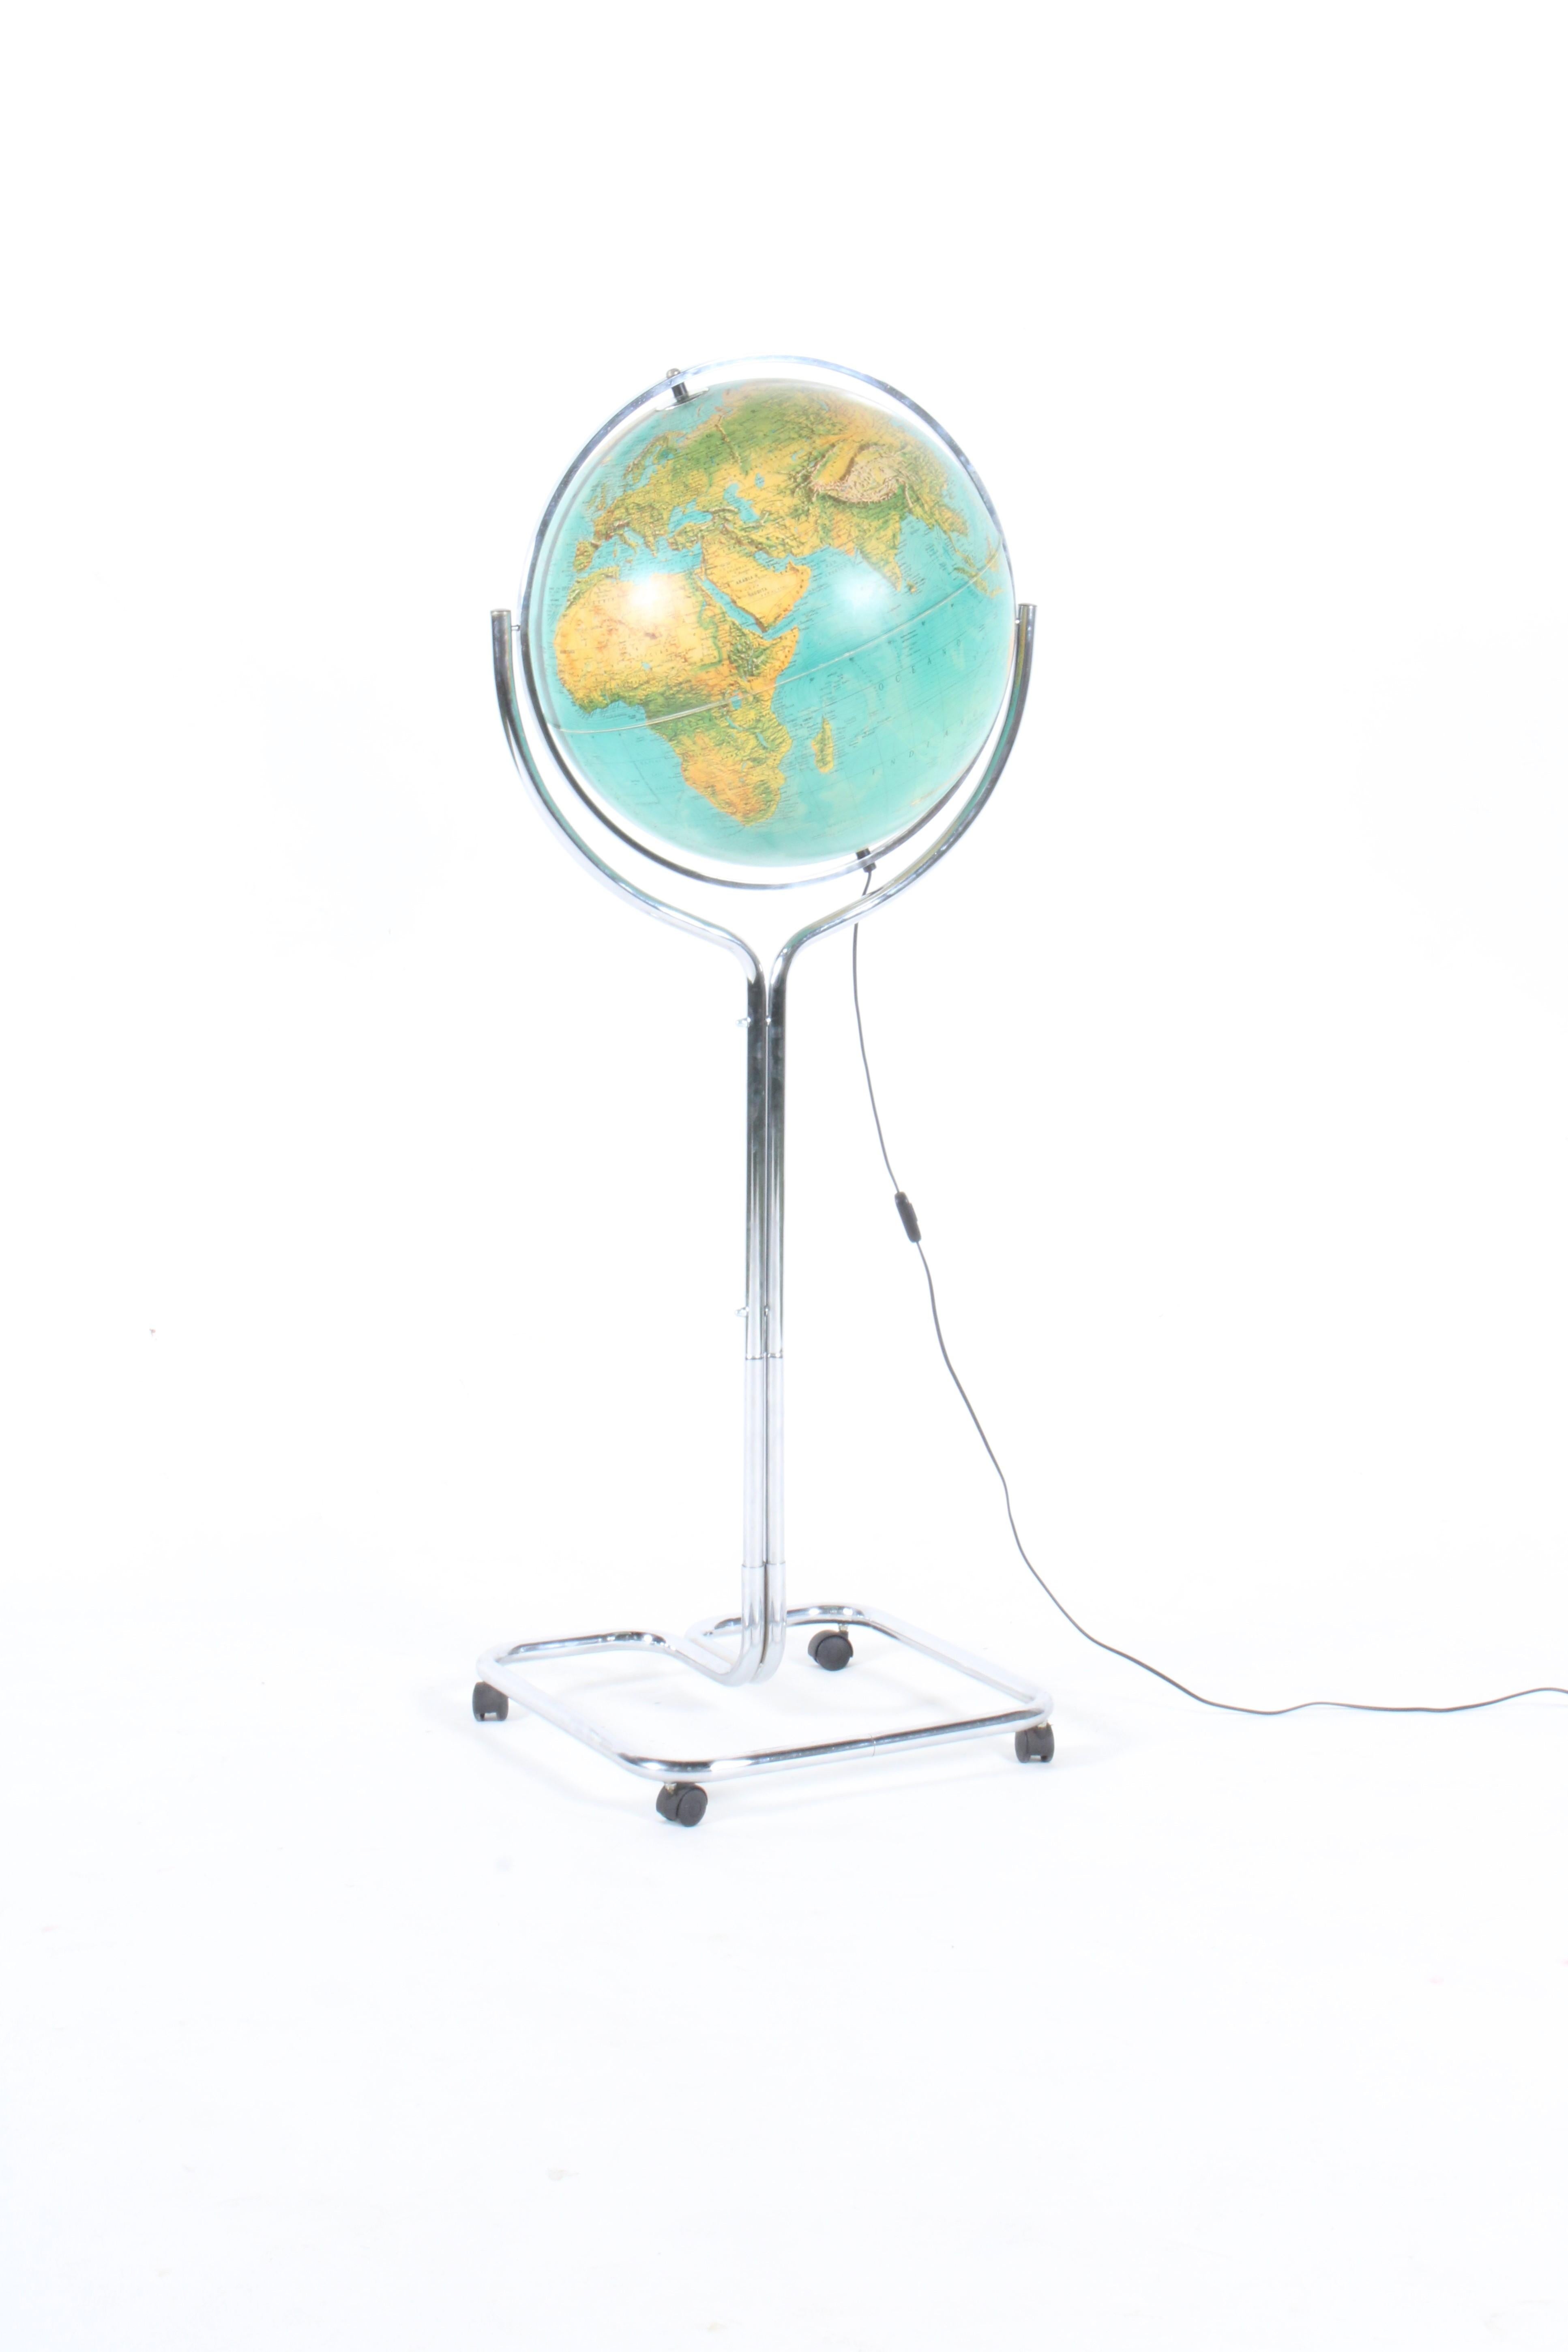 Stunning Vintage Italian Freestanding Globe By Ricoscope Florence *Free Delivery 10